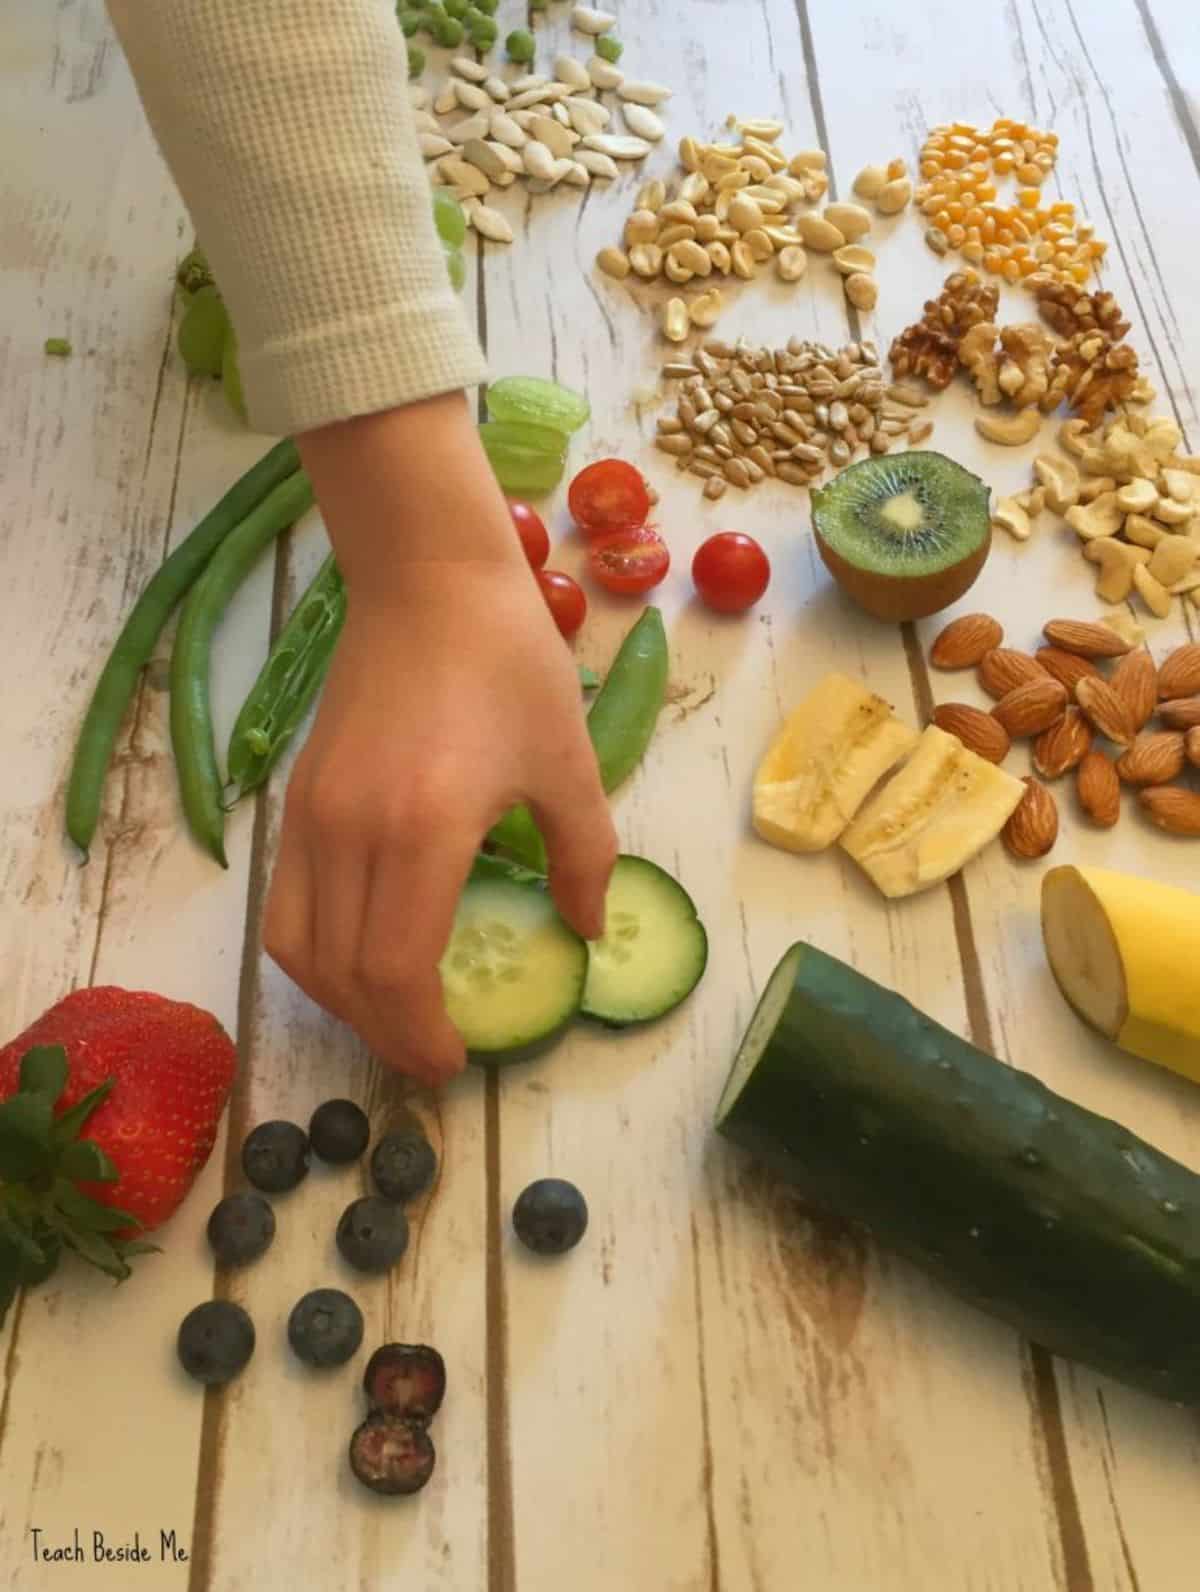 Hands are touching slices of cucumber on a wooden table with sliced vegetables, fruits and nuts.